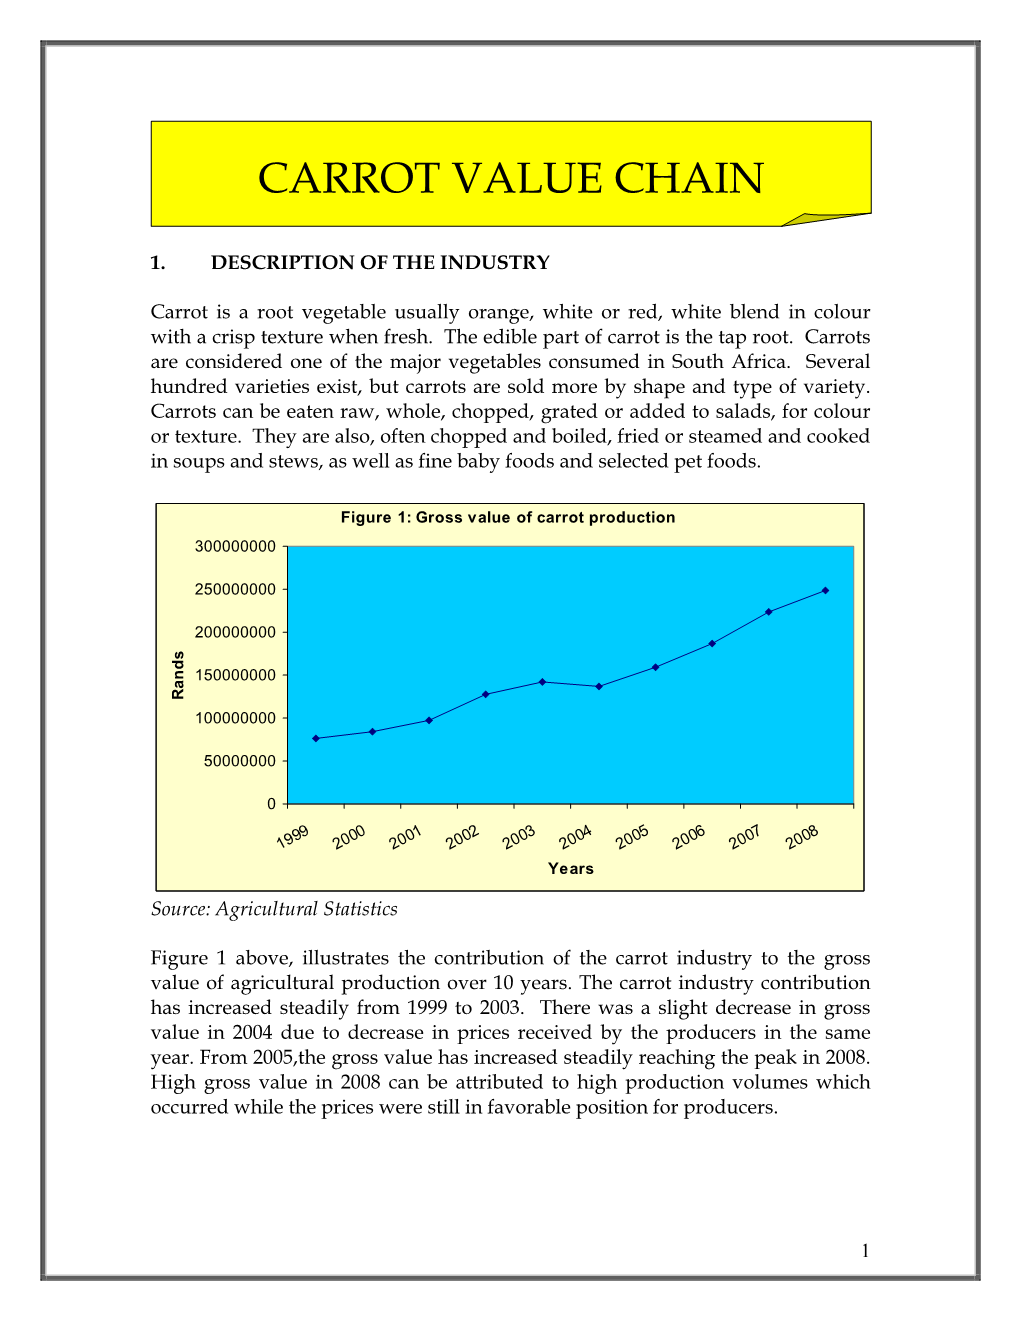 Carrot Value Chain